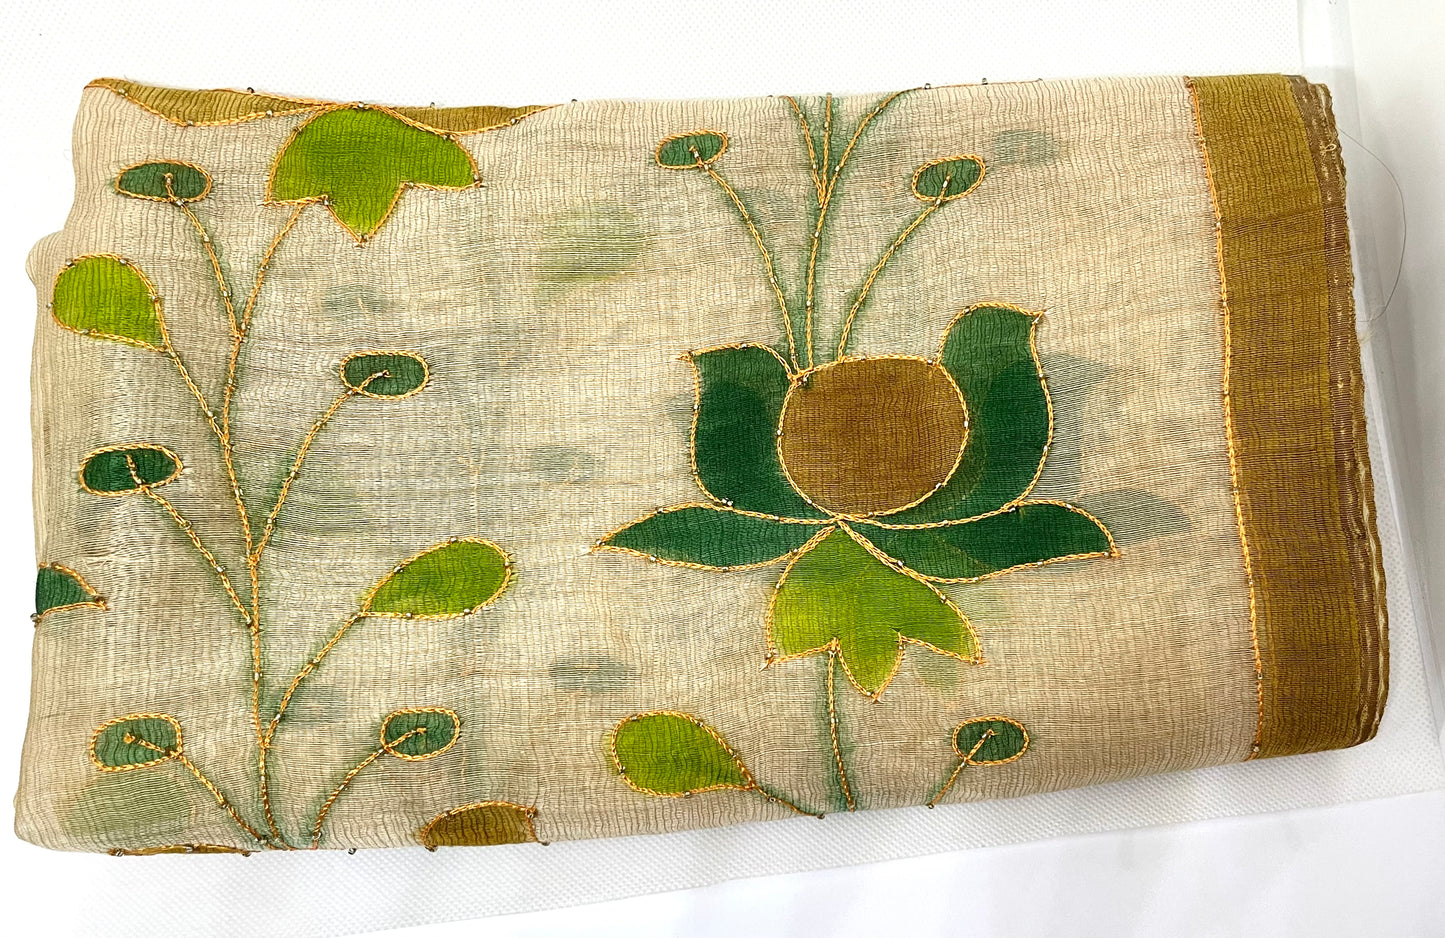 The Gold Scarf - Hand Painted and Hand Embroidered